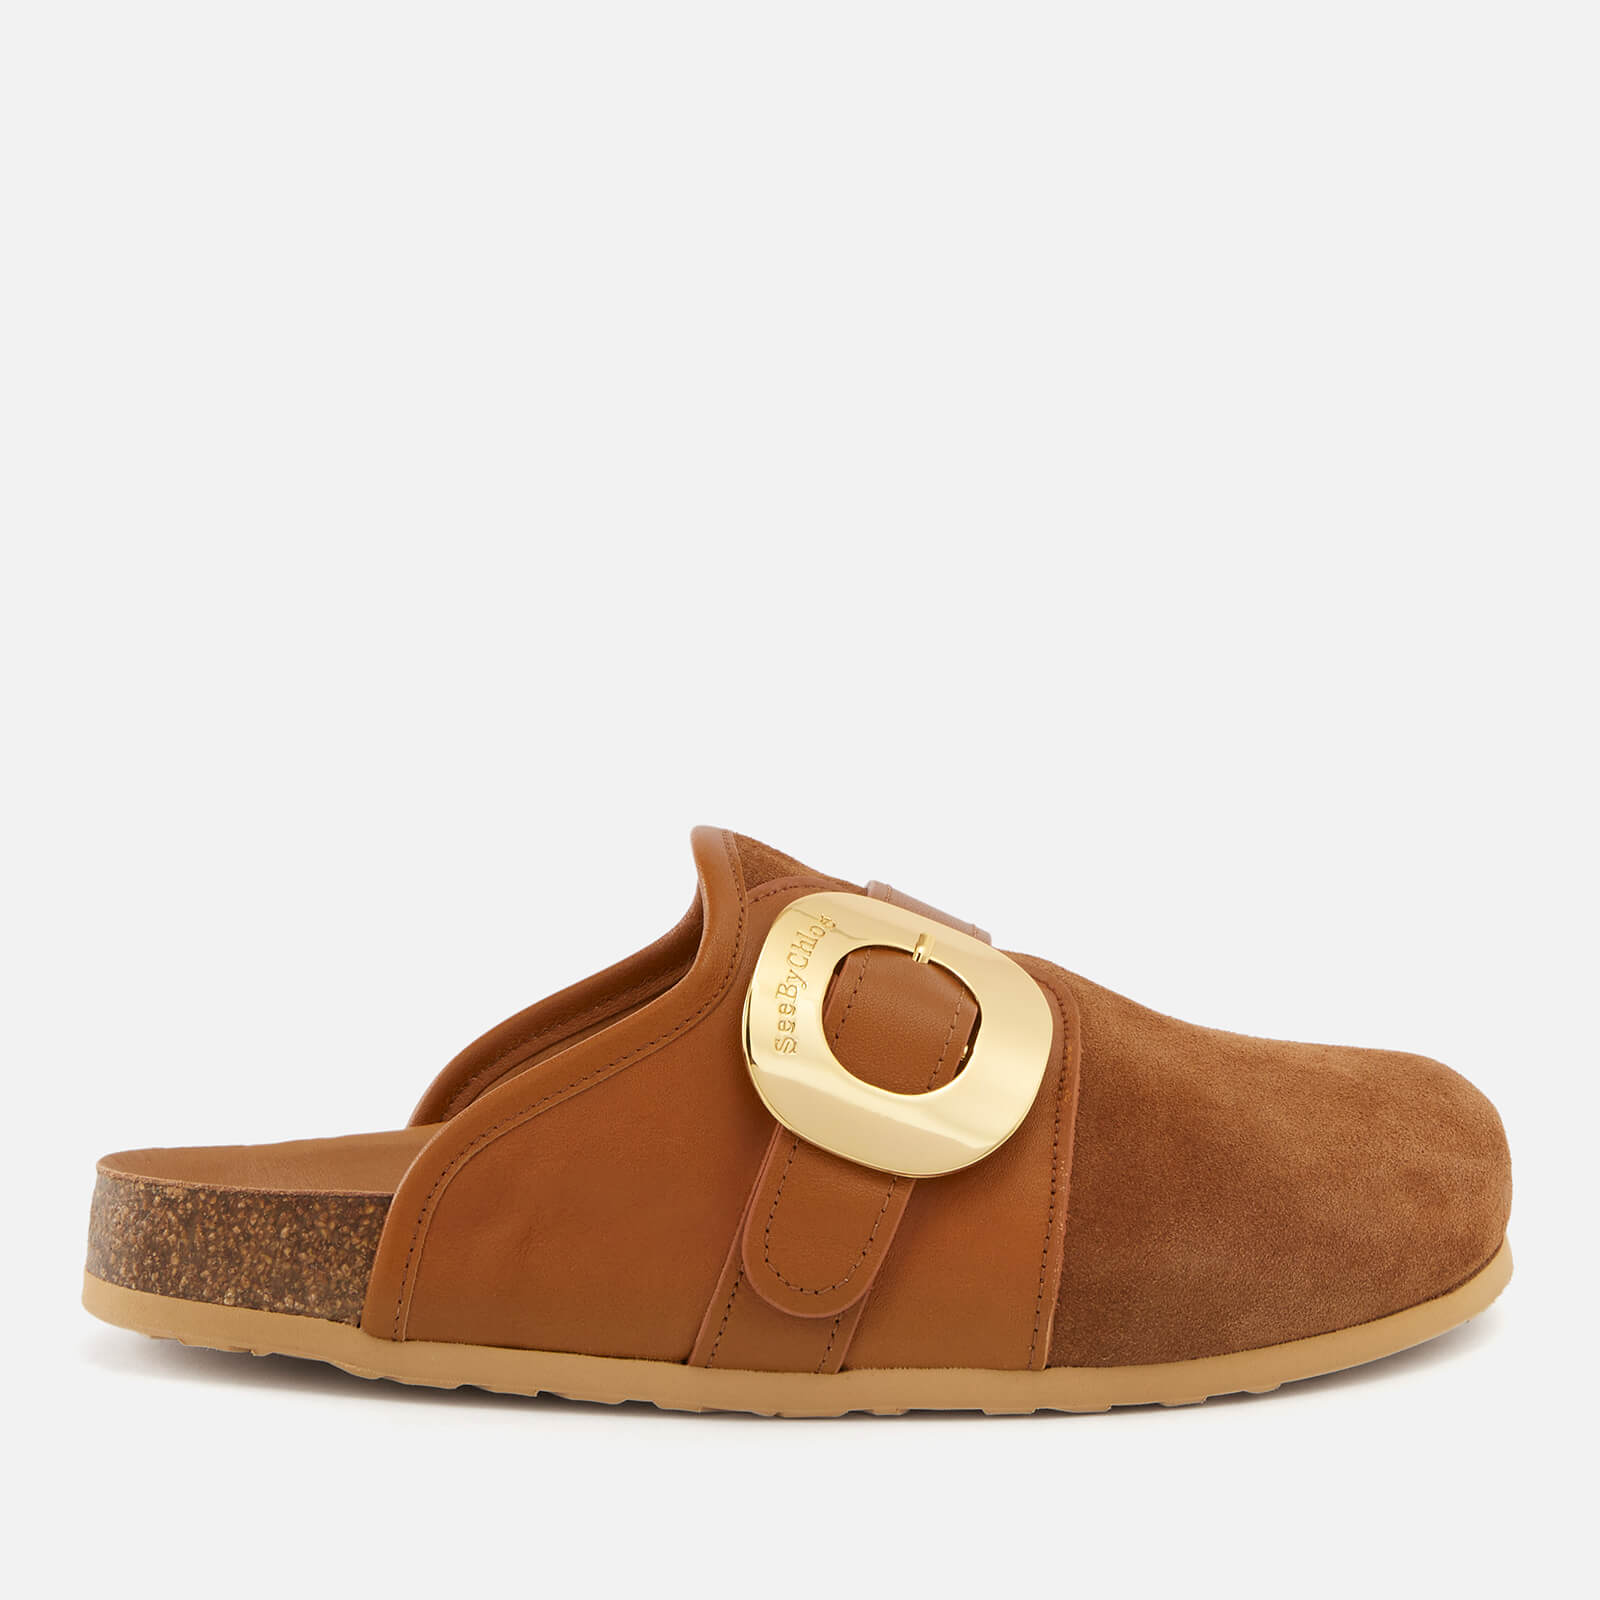 See by Chloe Women’s Chany Fussbelt Suede Mules